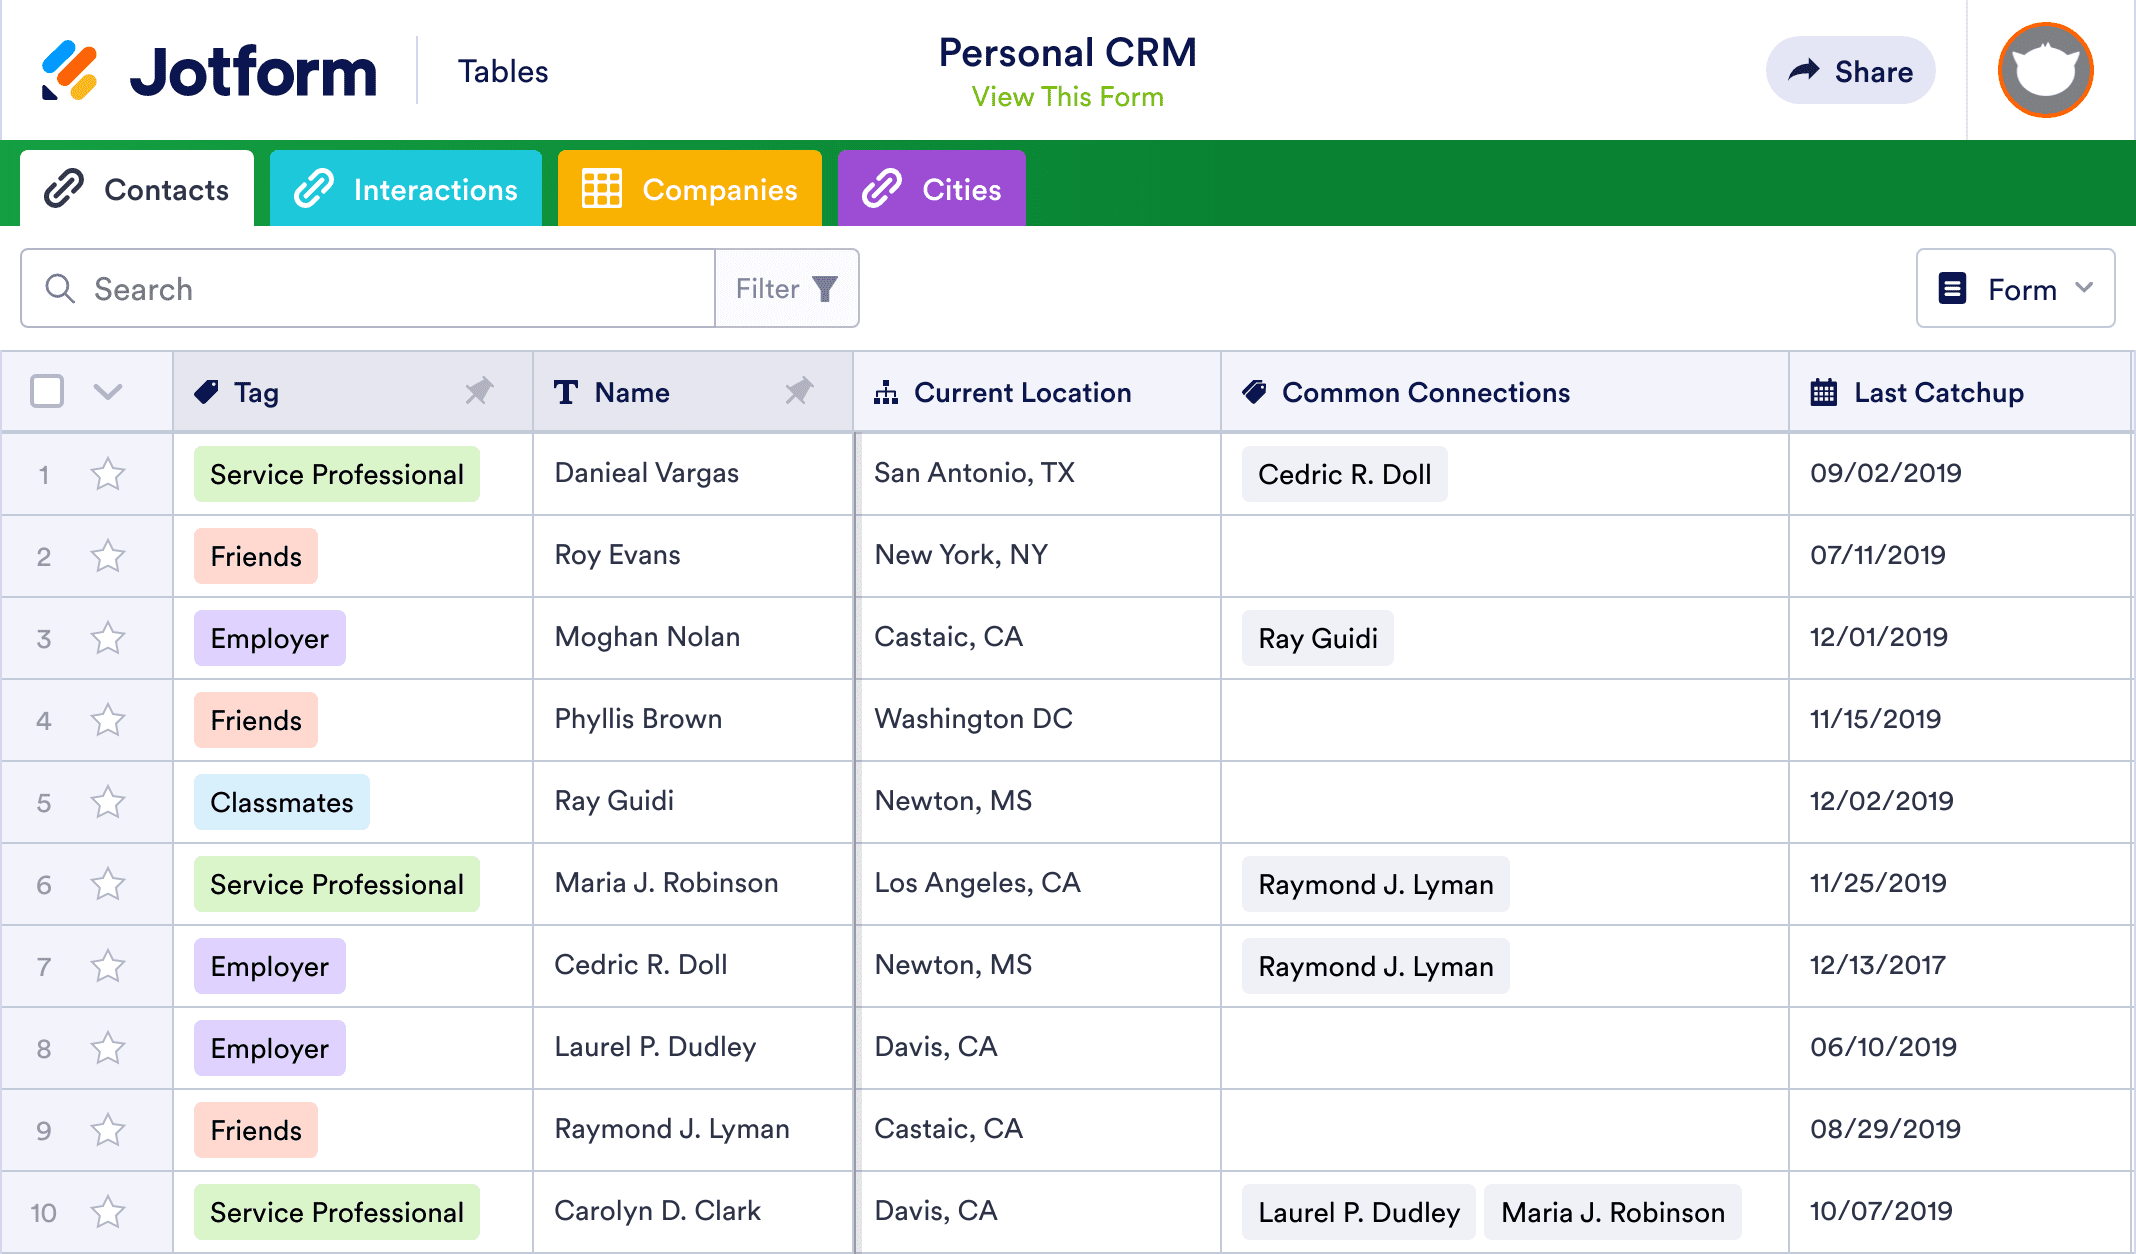 Personal CRM